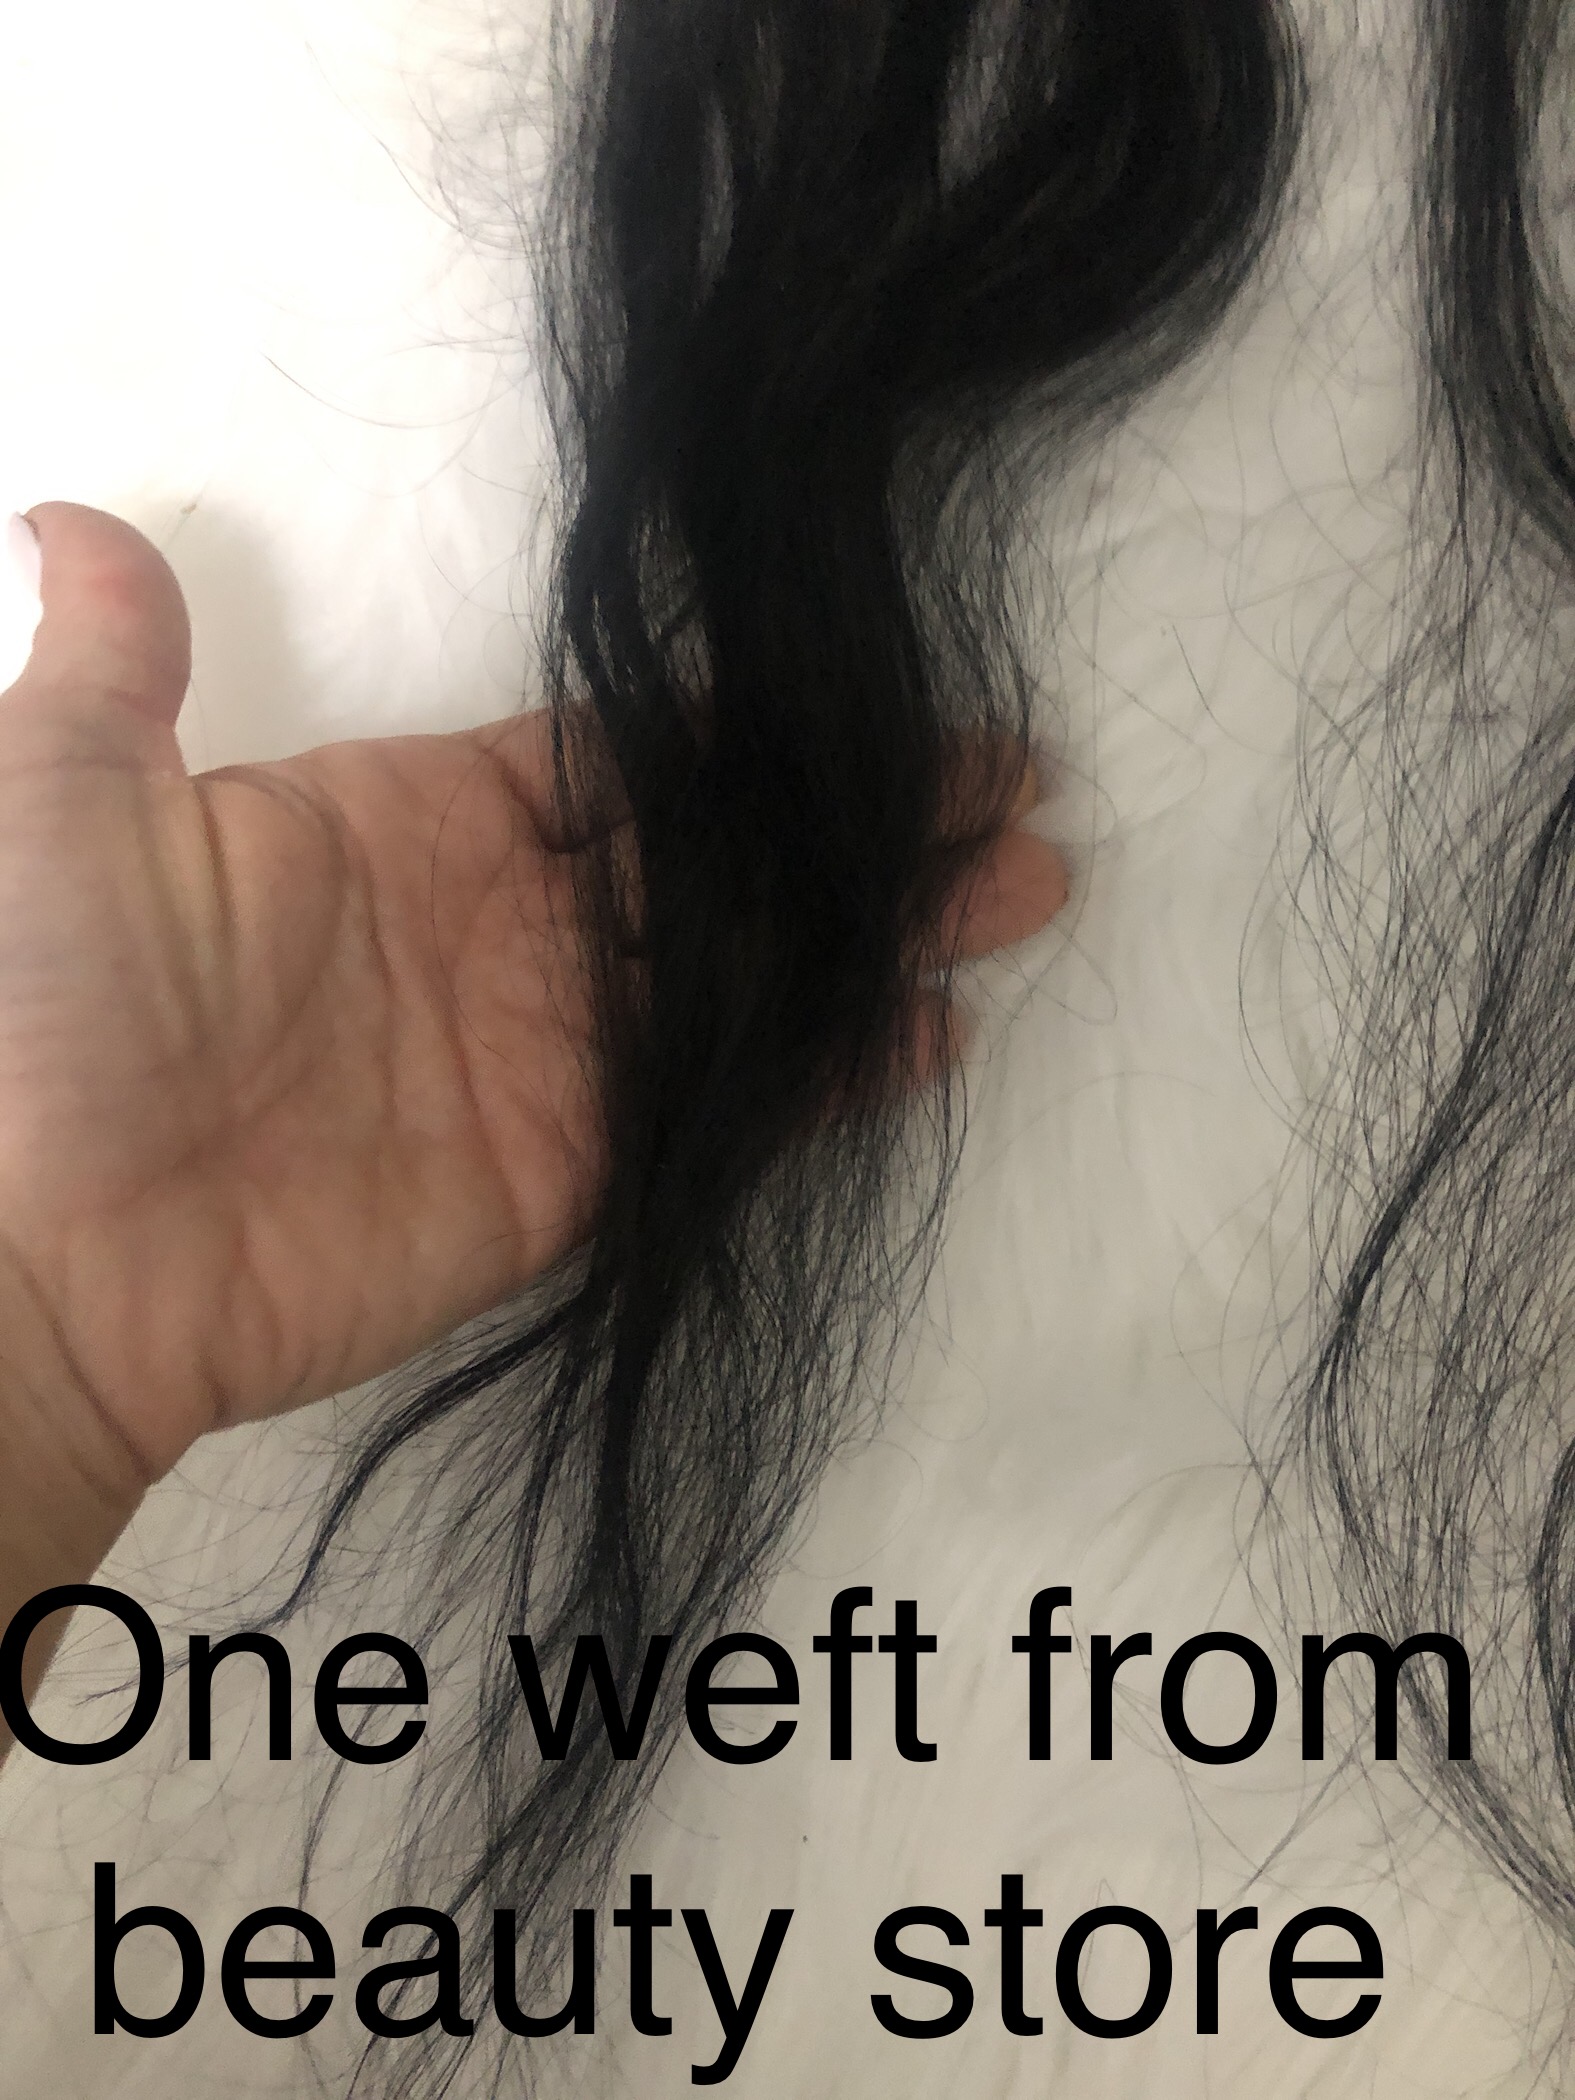 Compared to a normal weft 